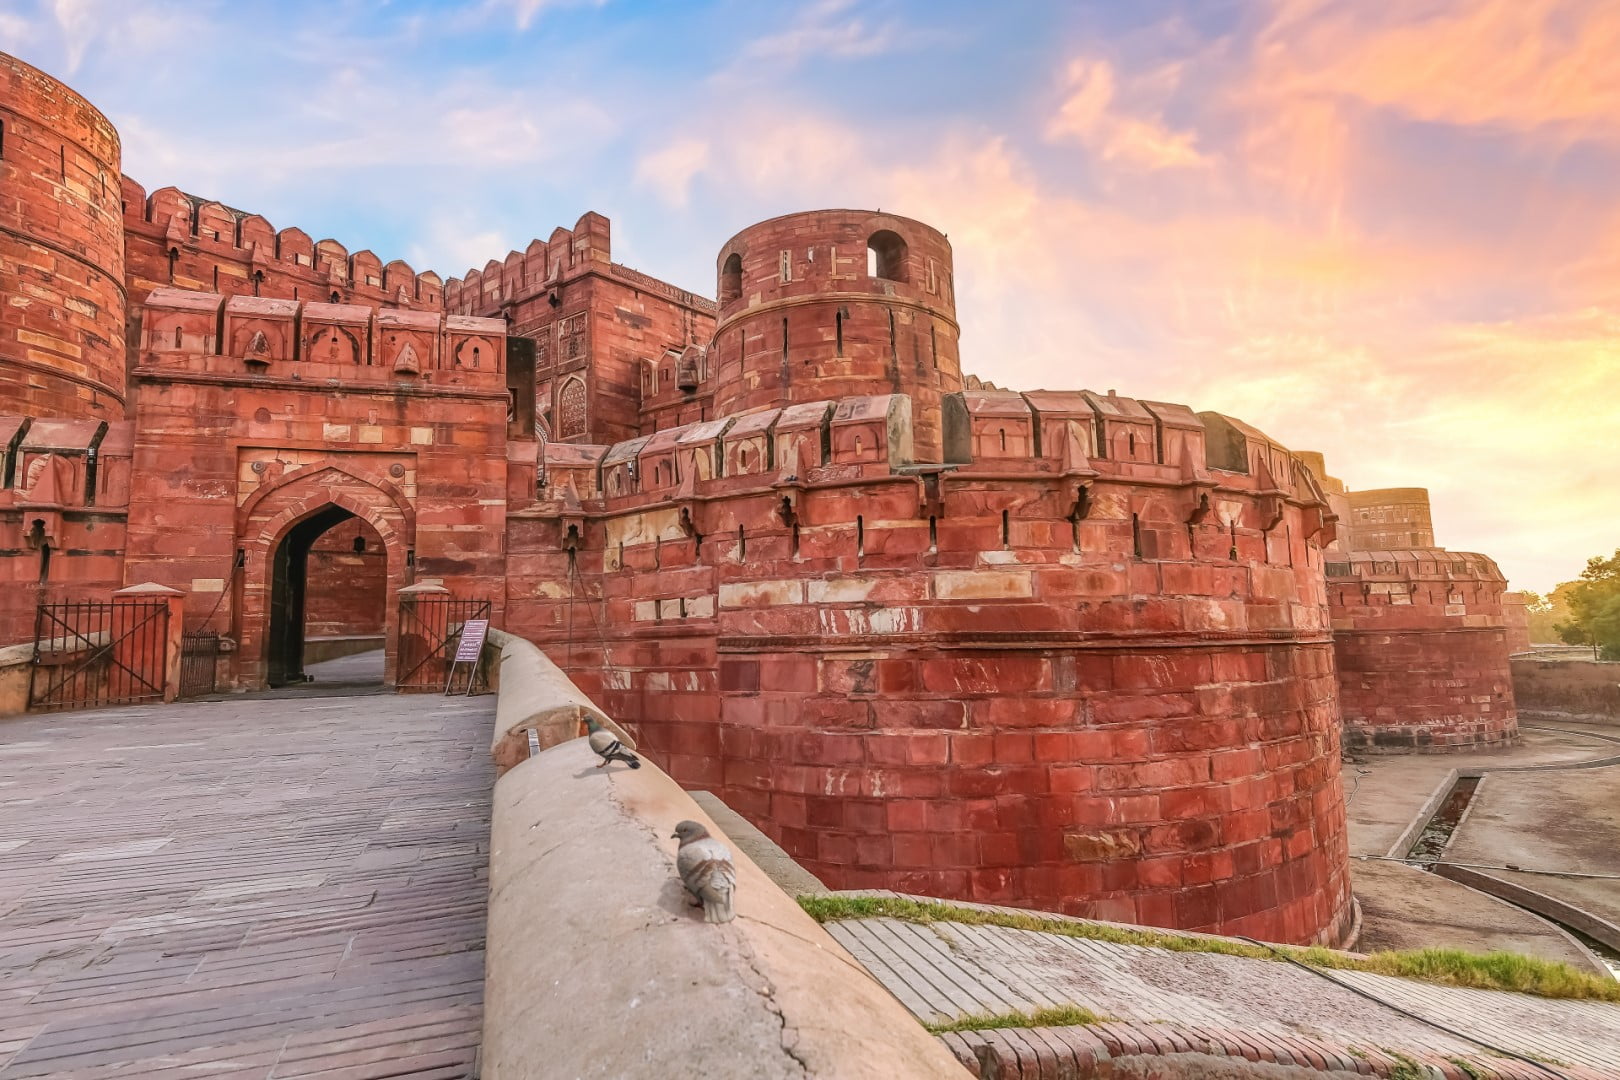 Historic medieval Agra Fort made of red sandstone at sunrise with moody sky. Agra Fort is a UNESCO World Heritage site